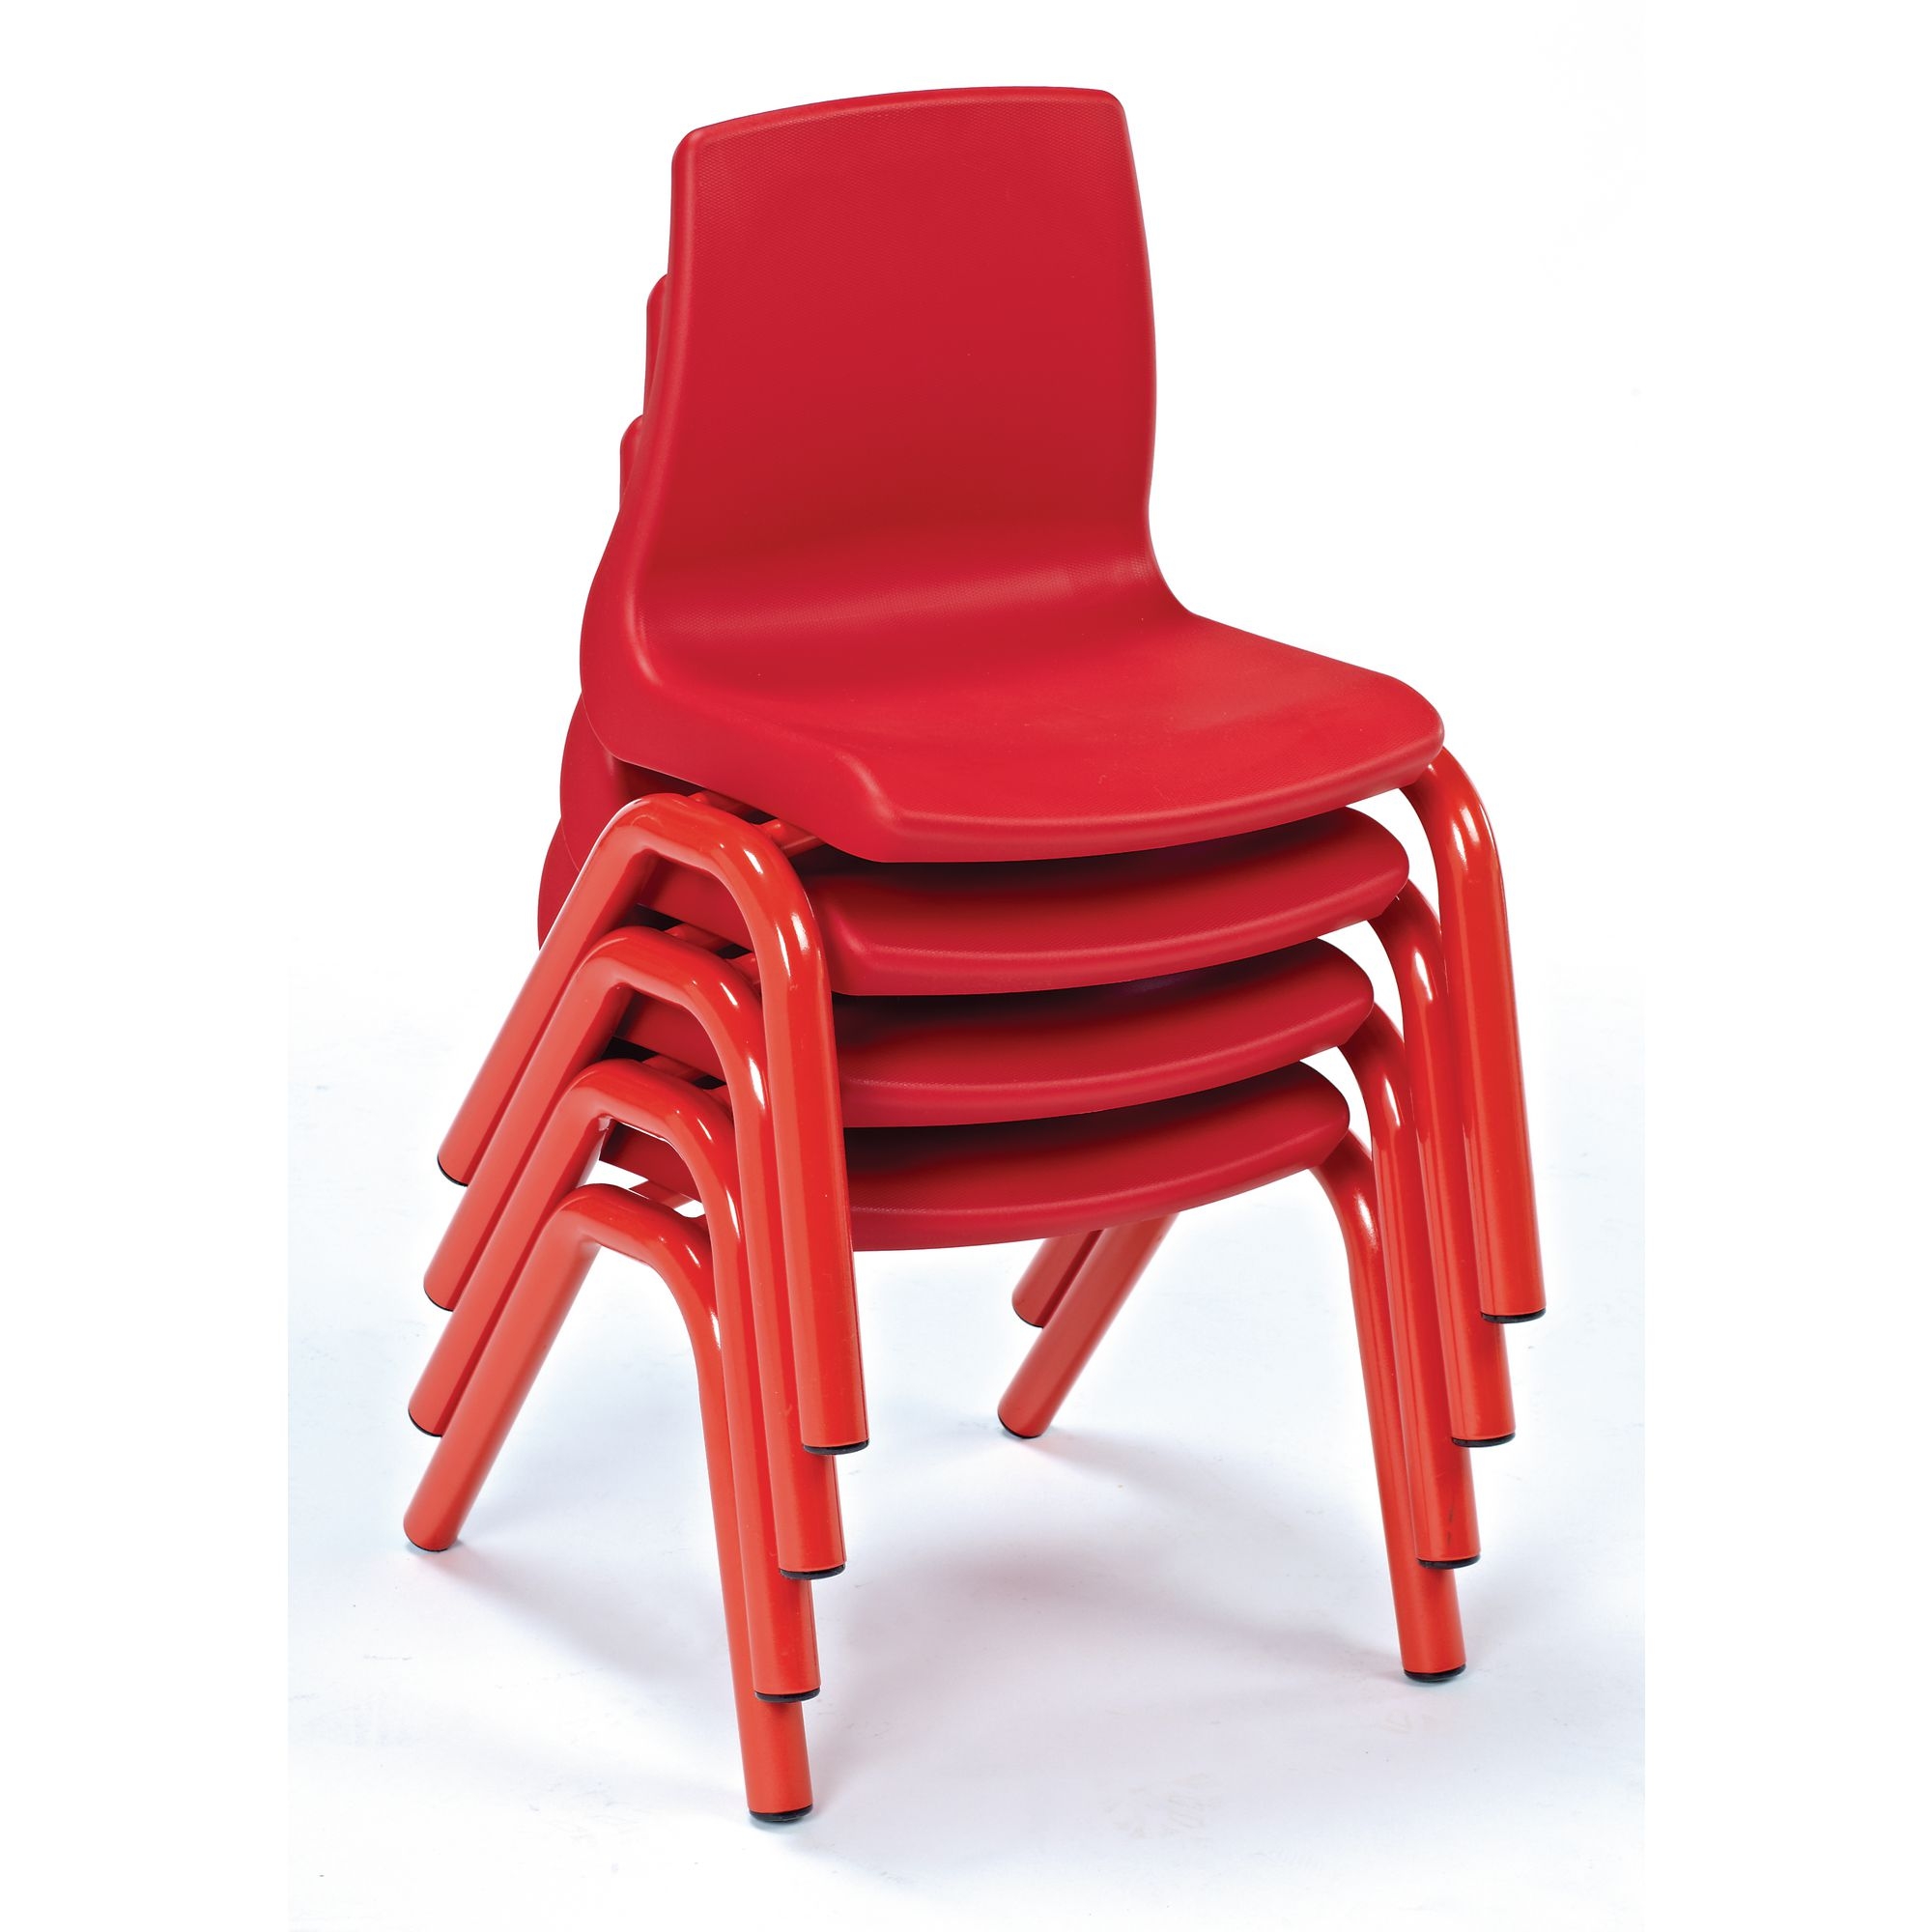 Harlequin Chairs - Size A - Seat height: 260mm - Red